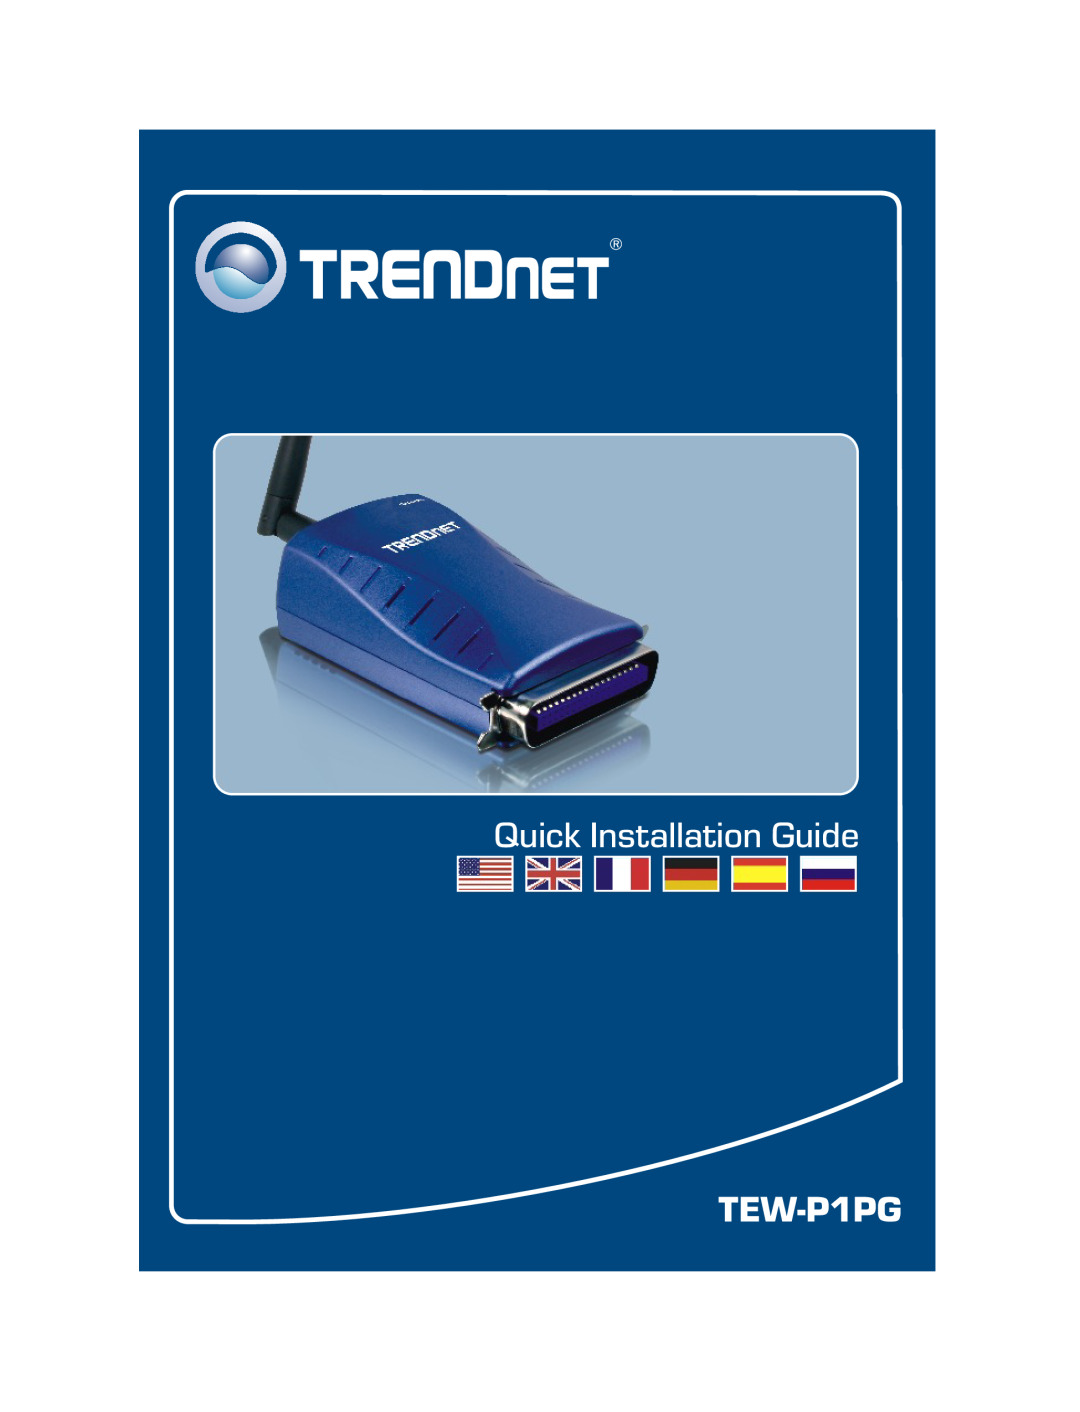 TRENDnet TEW-P1PG manual Quick Installation Guide 